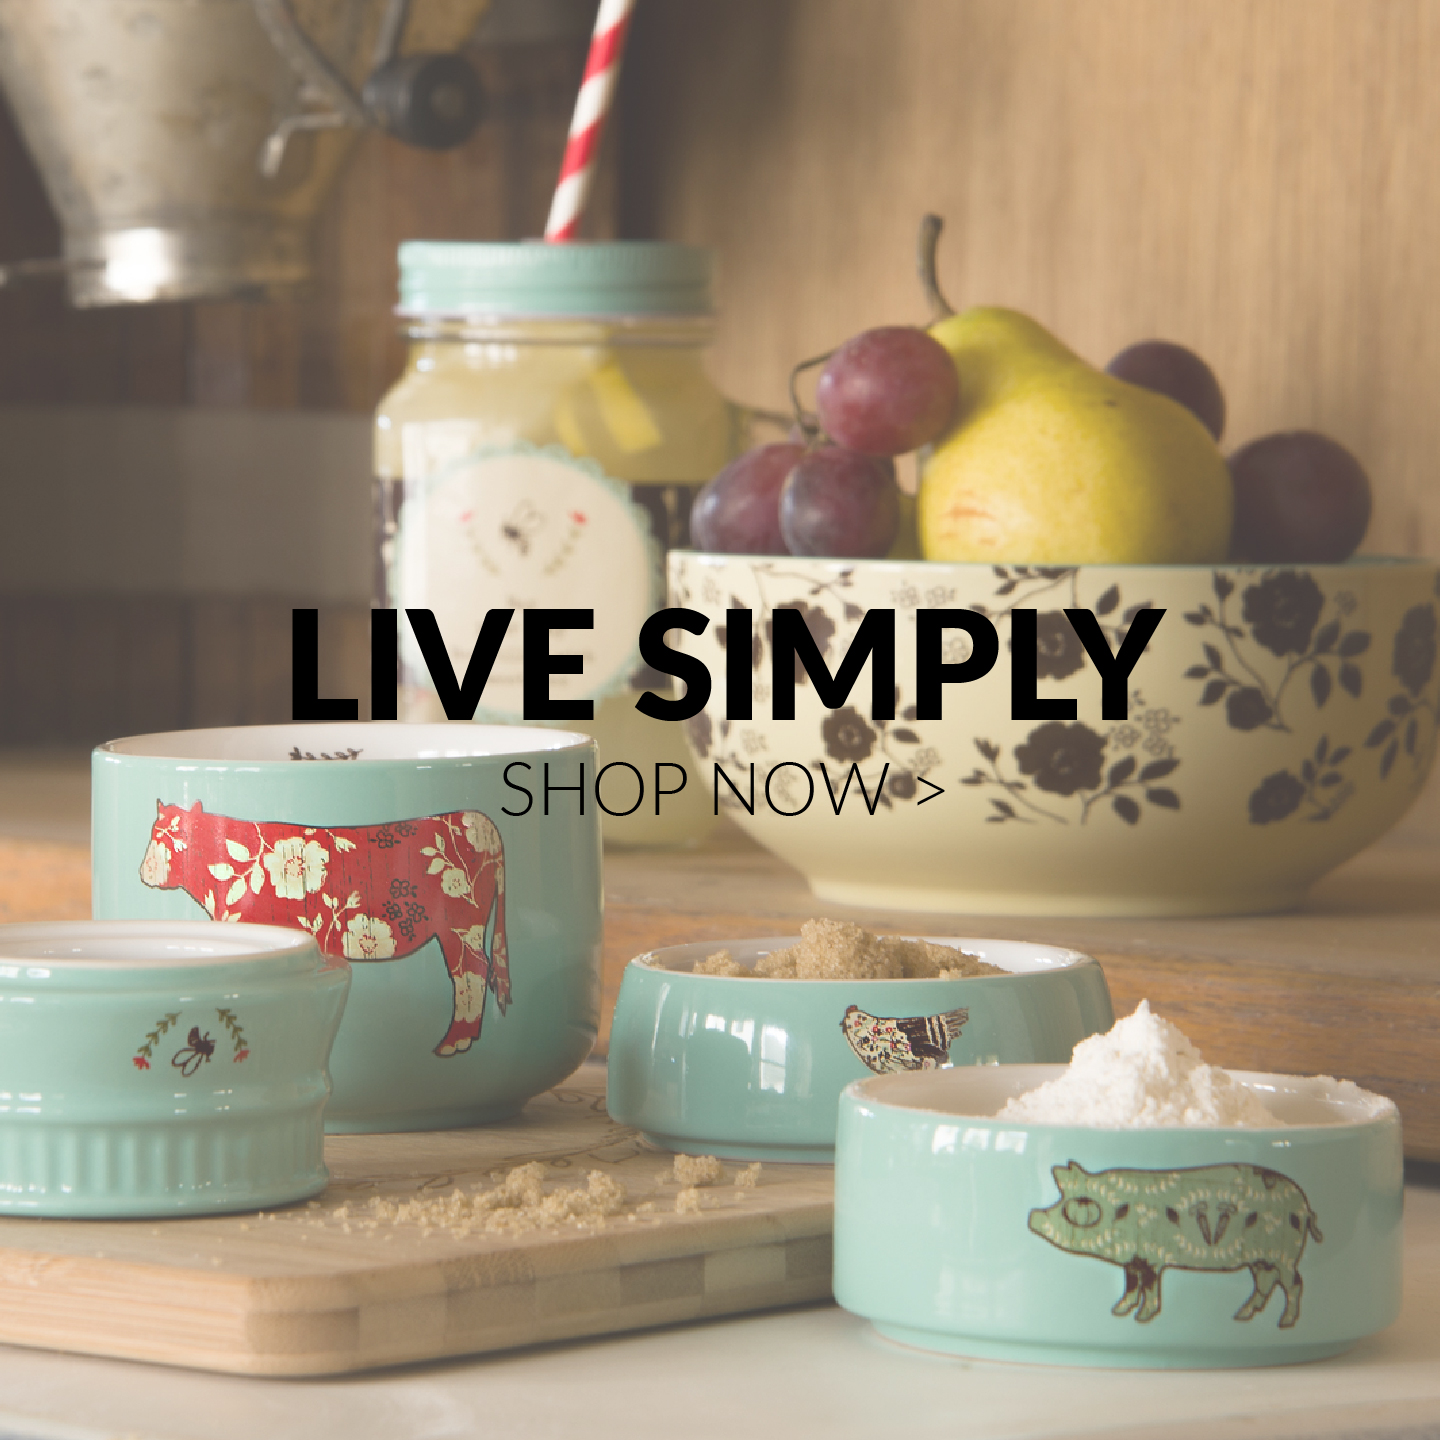 Live Simply by Amylee Weeks